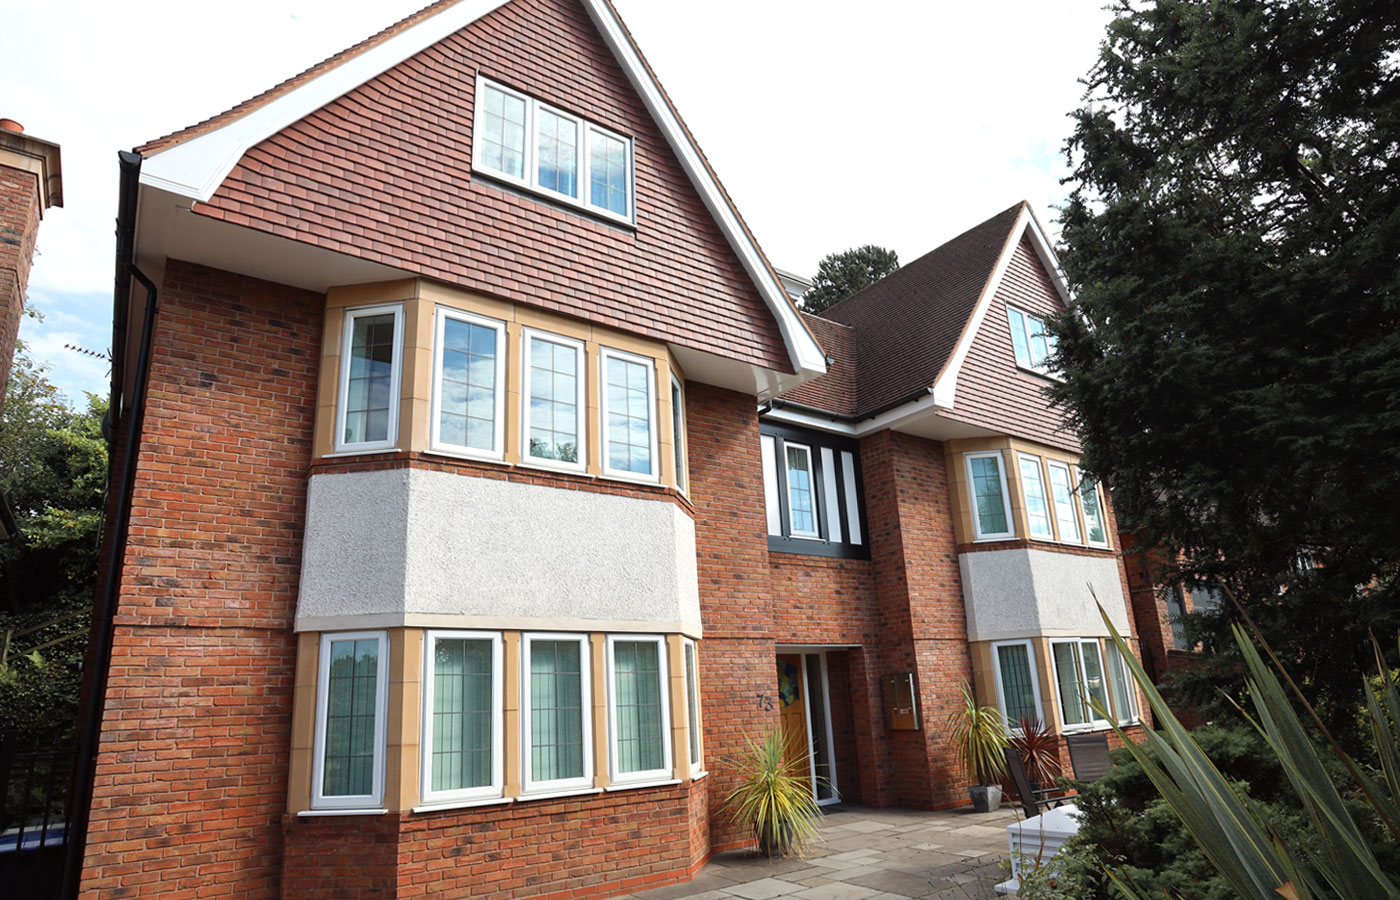 Windley Gate, 13 new build apartments Sutton Coldfield – resembling traditional residences